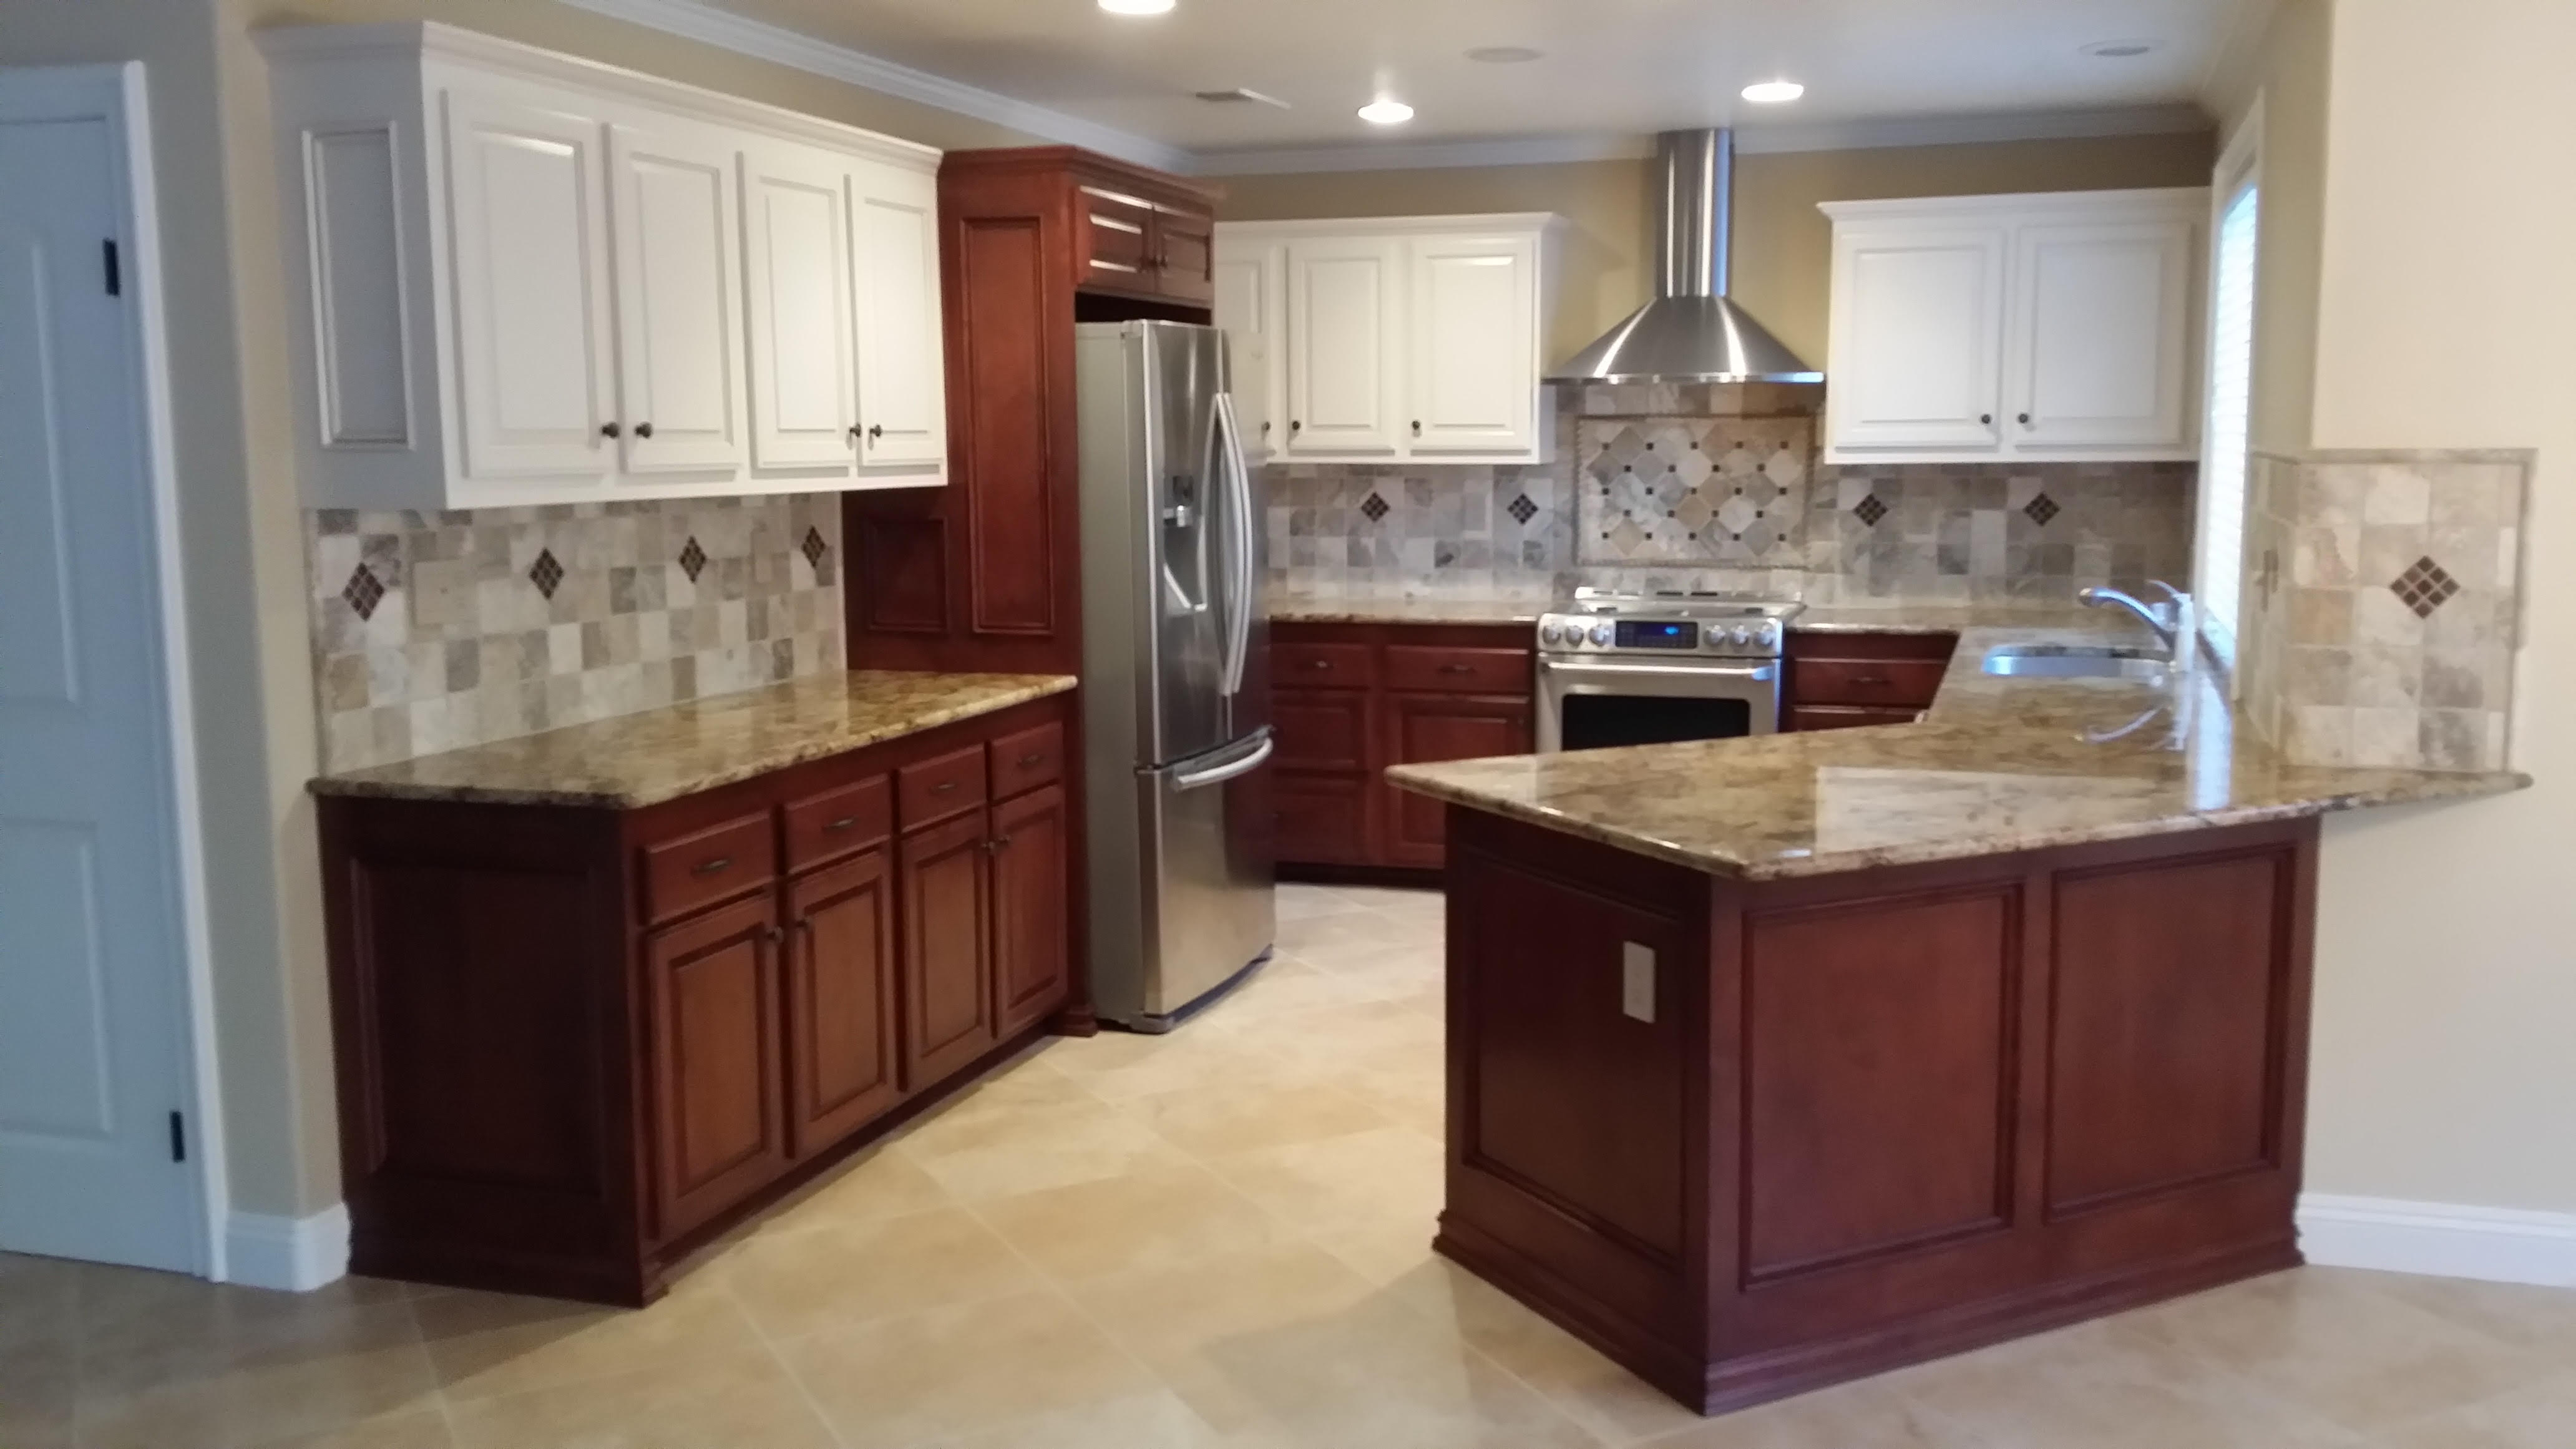 Newly refaced like new, elegant kitchen cabinets